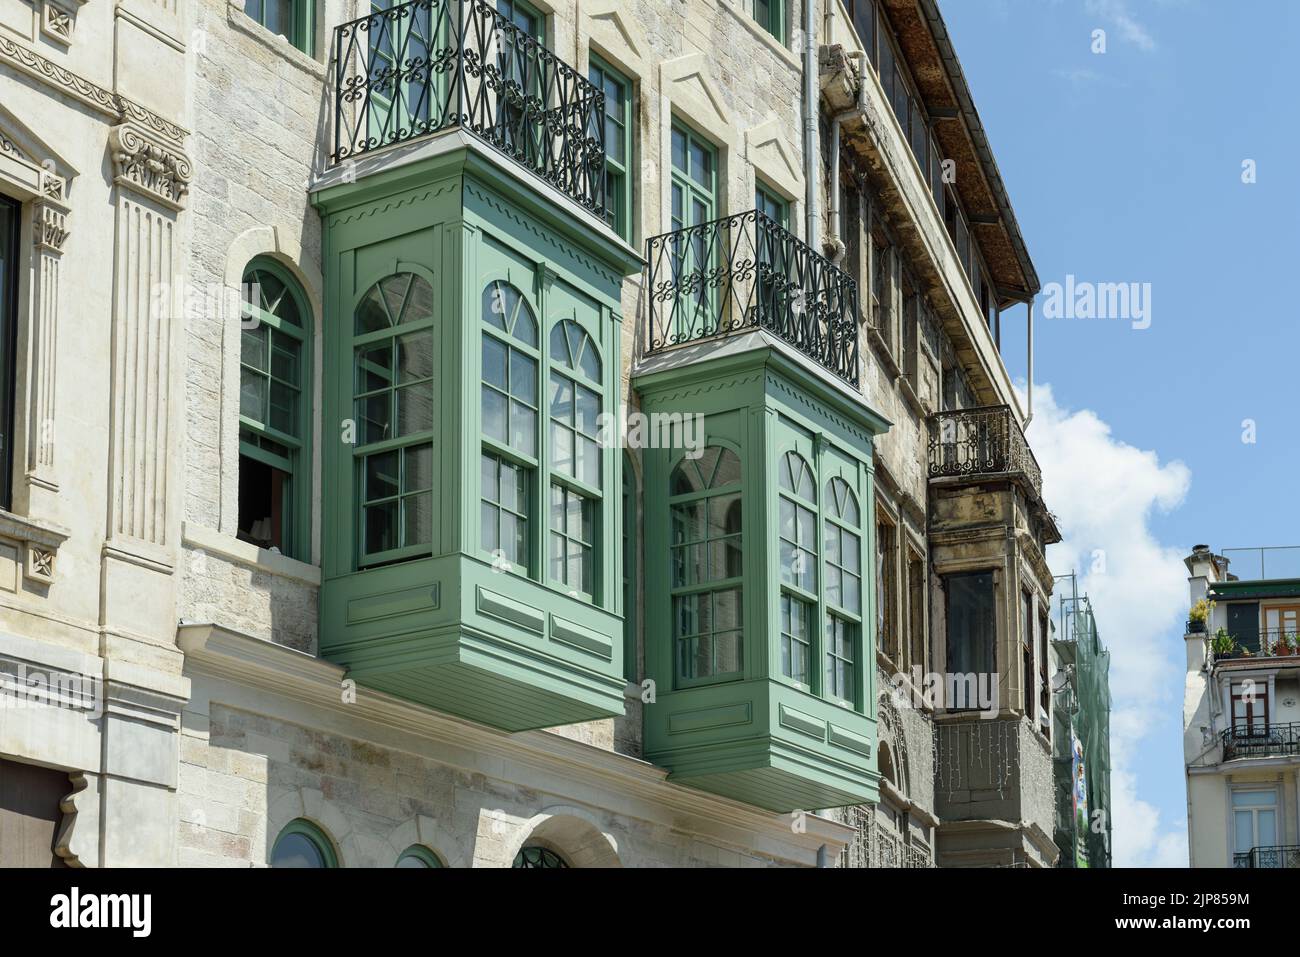 ISTANBUL, TURKEY - AUGUST 2, 2022: A view of Galata Streets. Galata houses the Galata Tower which is one of the most iconic historical sites of Istanb Stock Photo